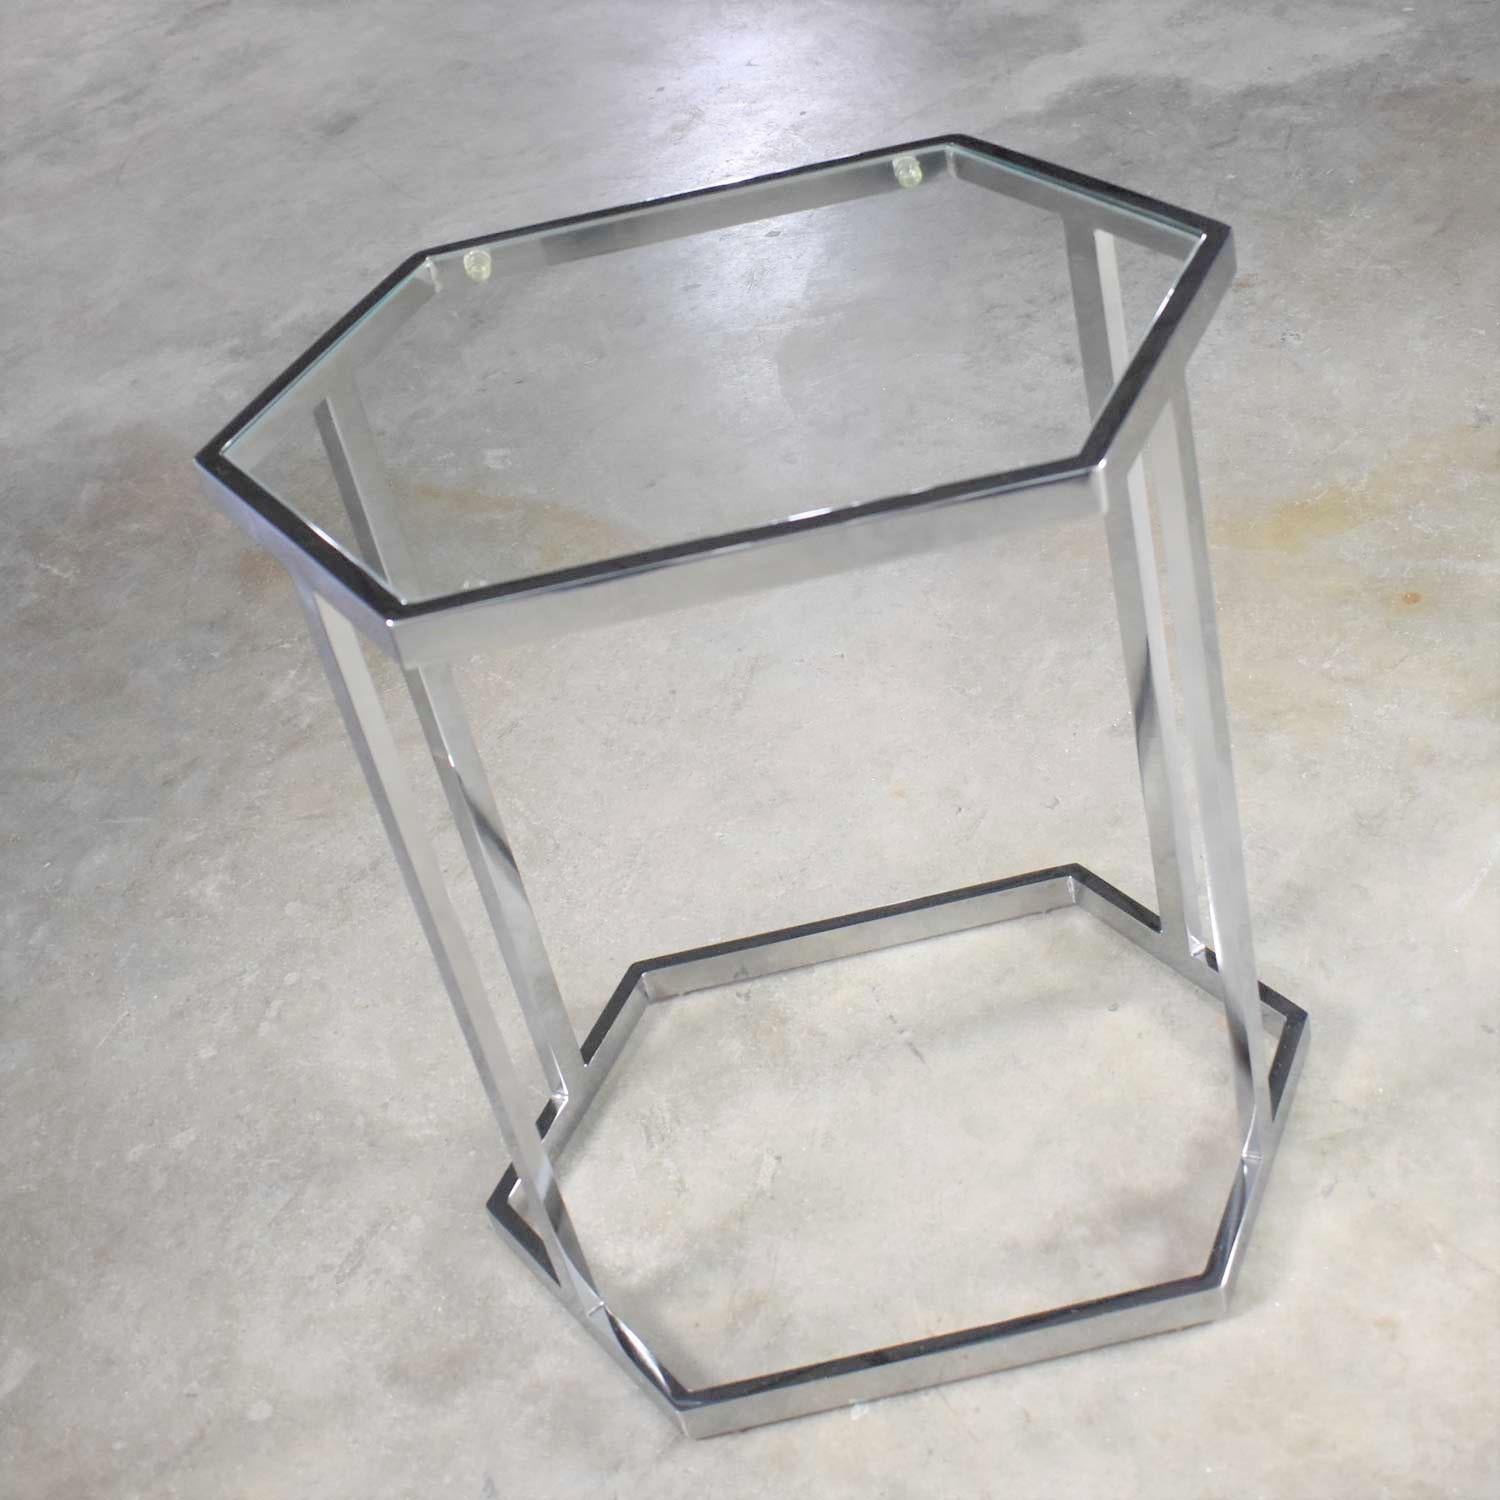 Handsome and petite vintage modern chrome and glass side table or occasional table. It is in fabulous vintage condition with only normal wear for its age. Please see photos, circa 1960s-1980s.

Sometimes you just need a knockout small movable